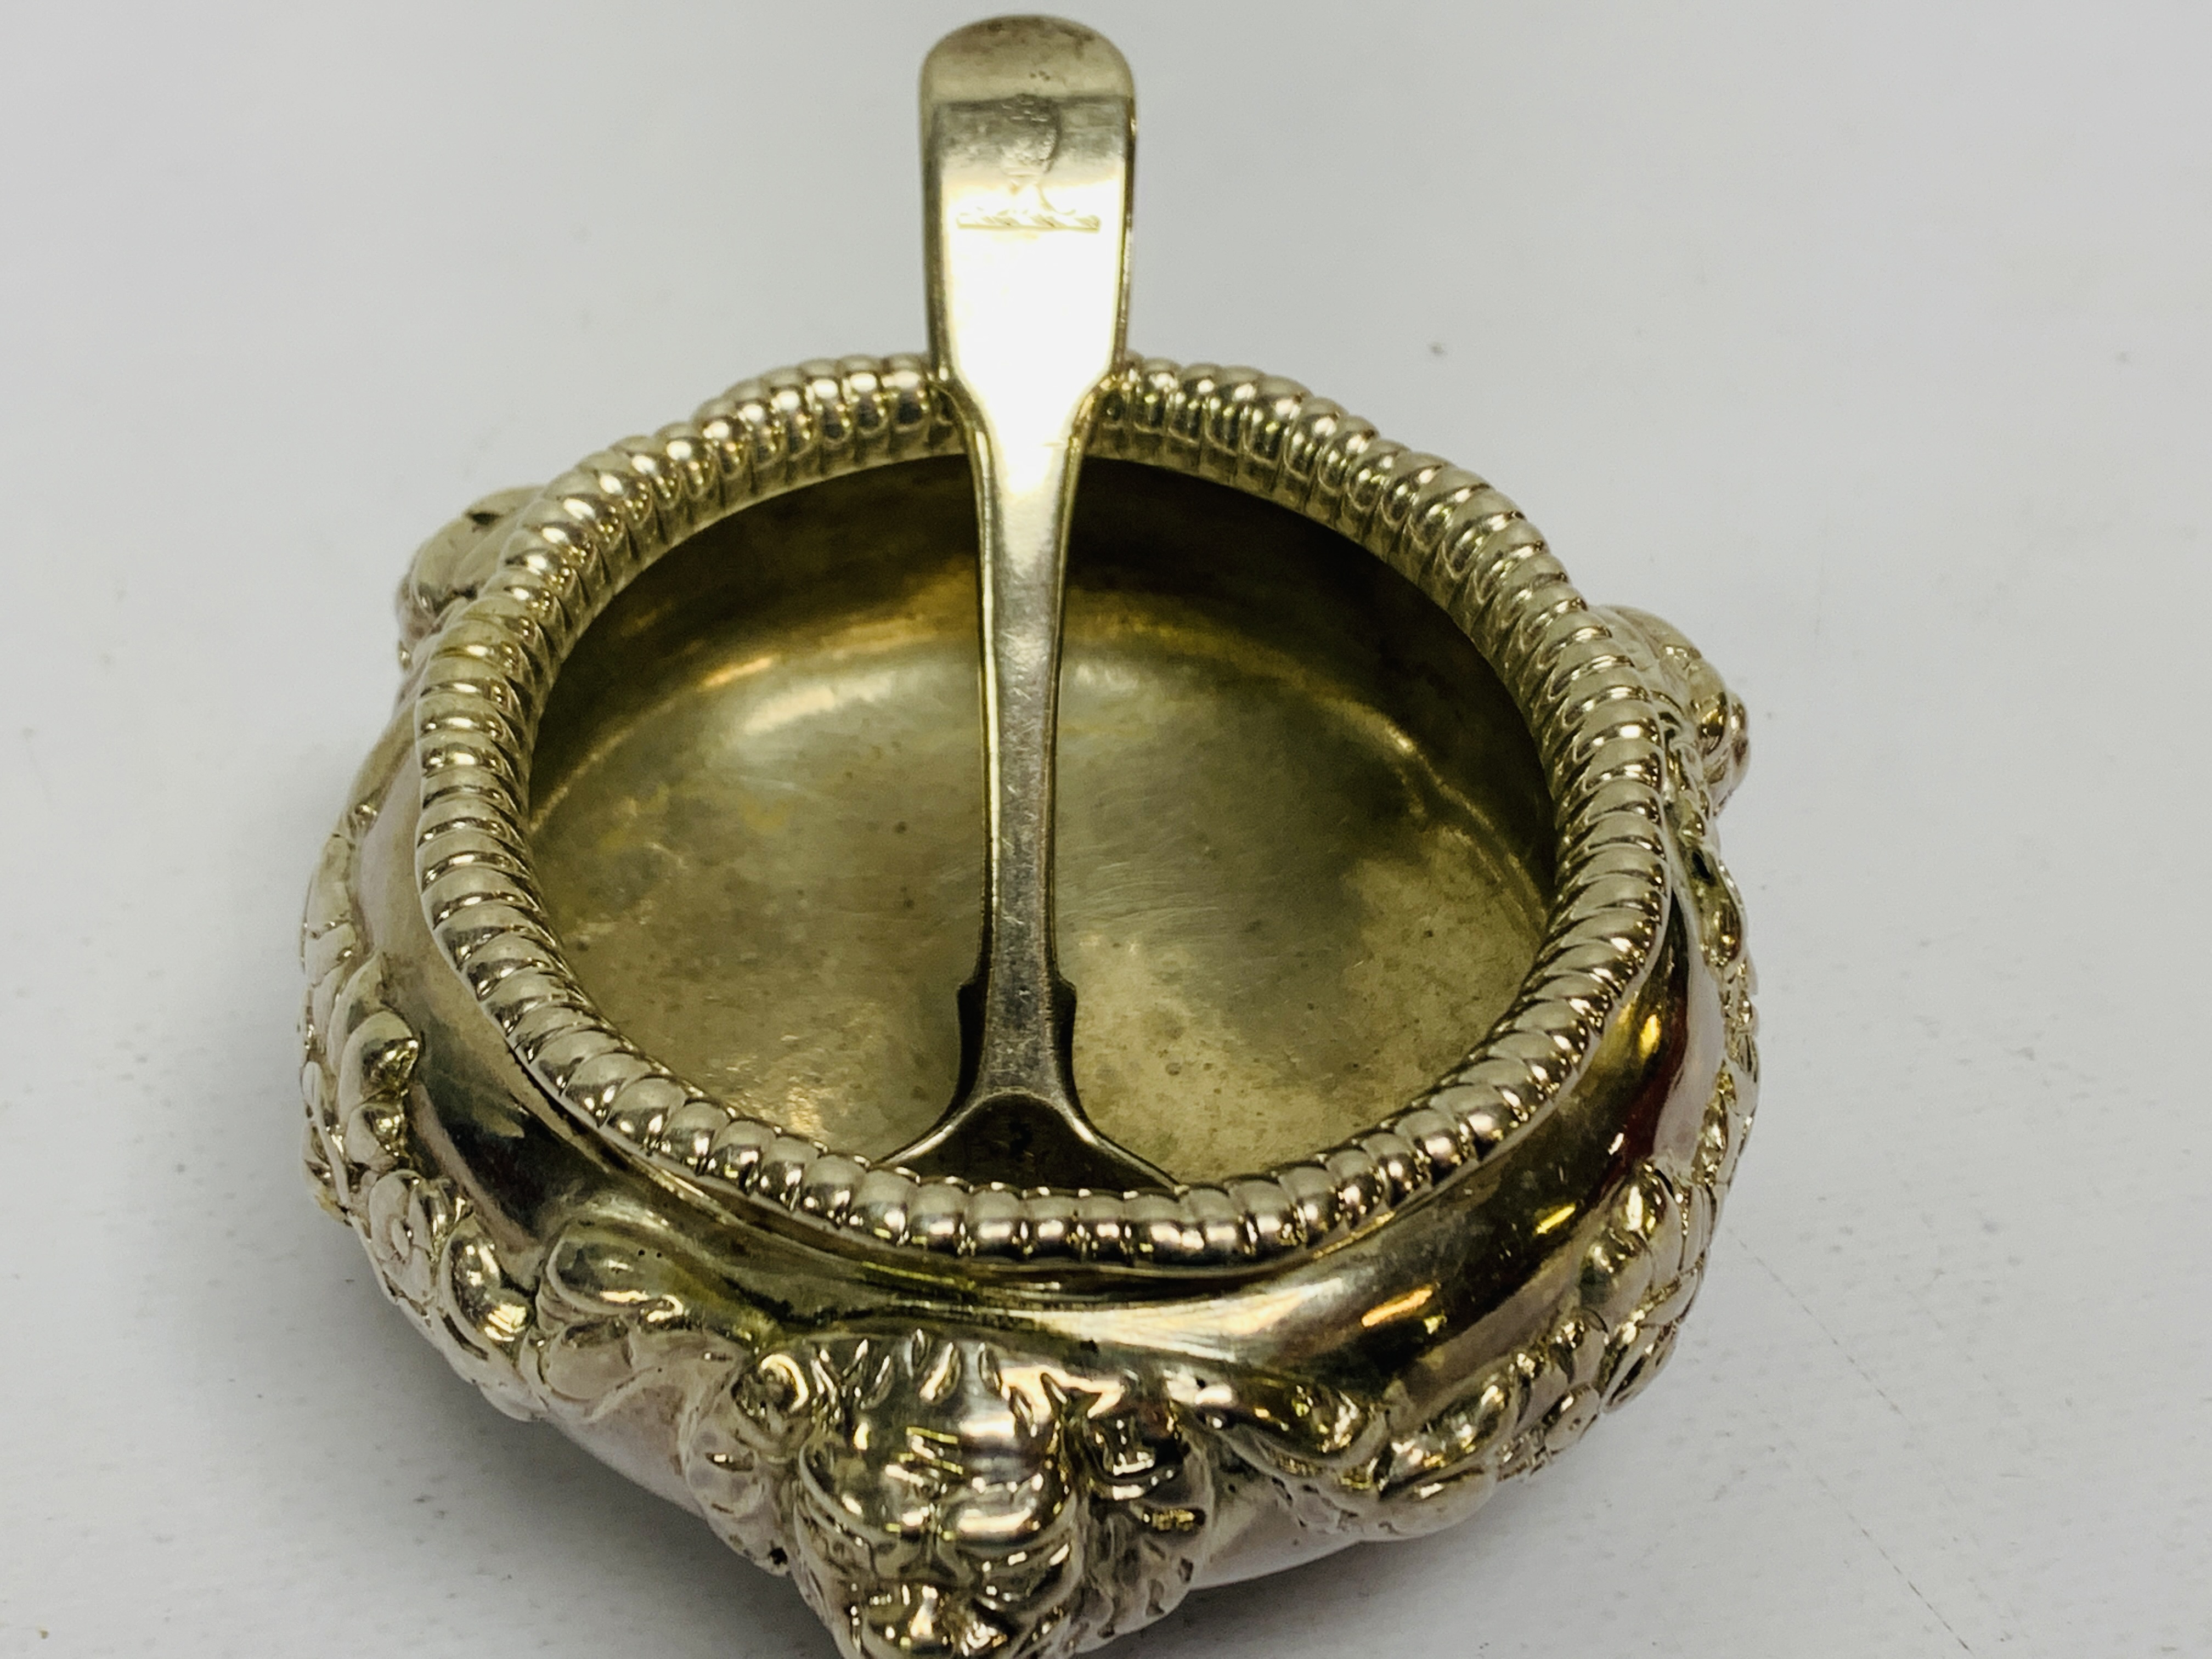 A GEORGE III IRISH TRIPOD SILVER SALT, HAVING LIONS' HEADS ABOVE LIONS' FEET SUPPORTS, - Image 6 of 10